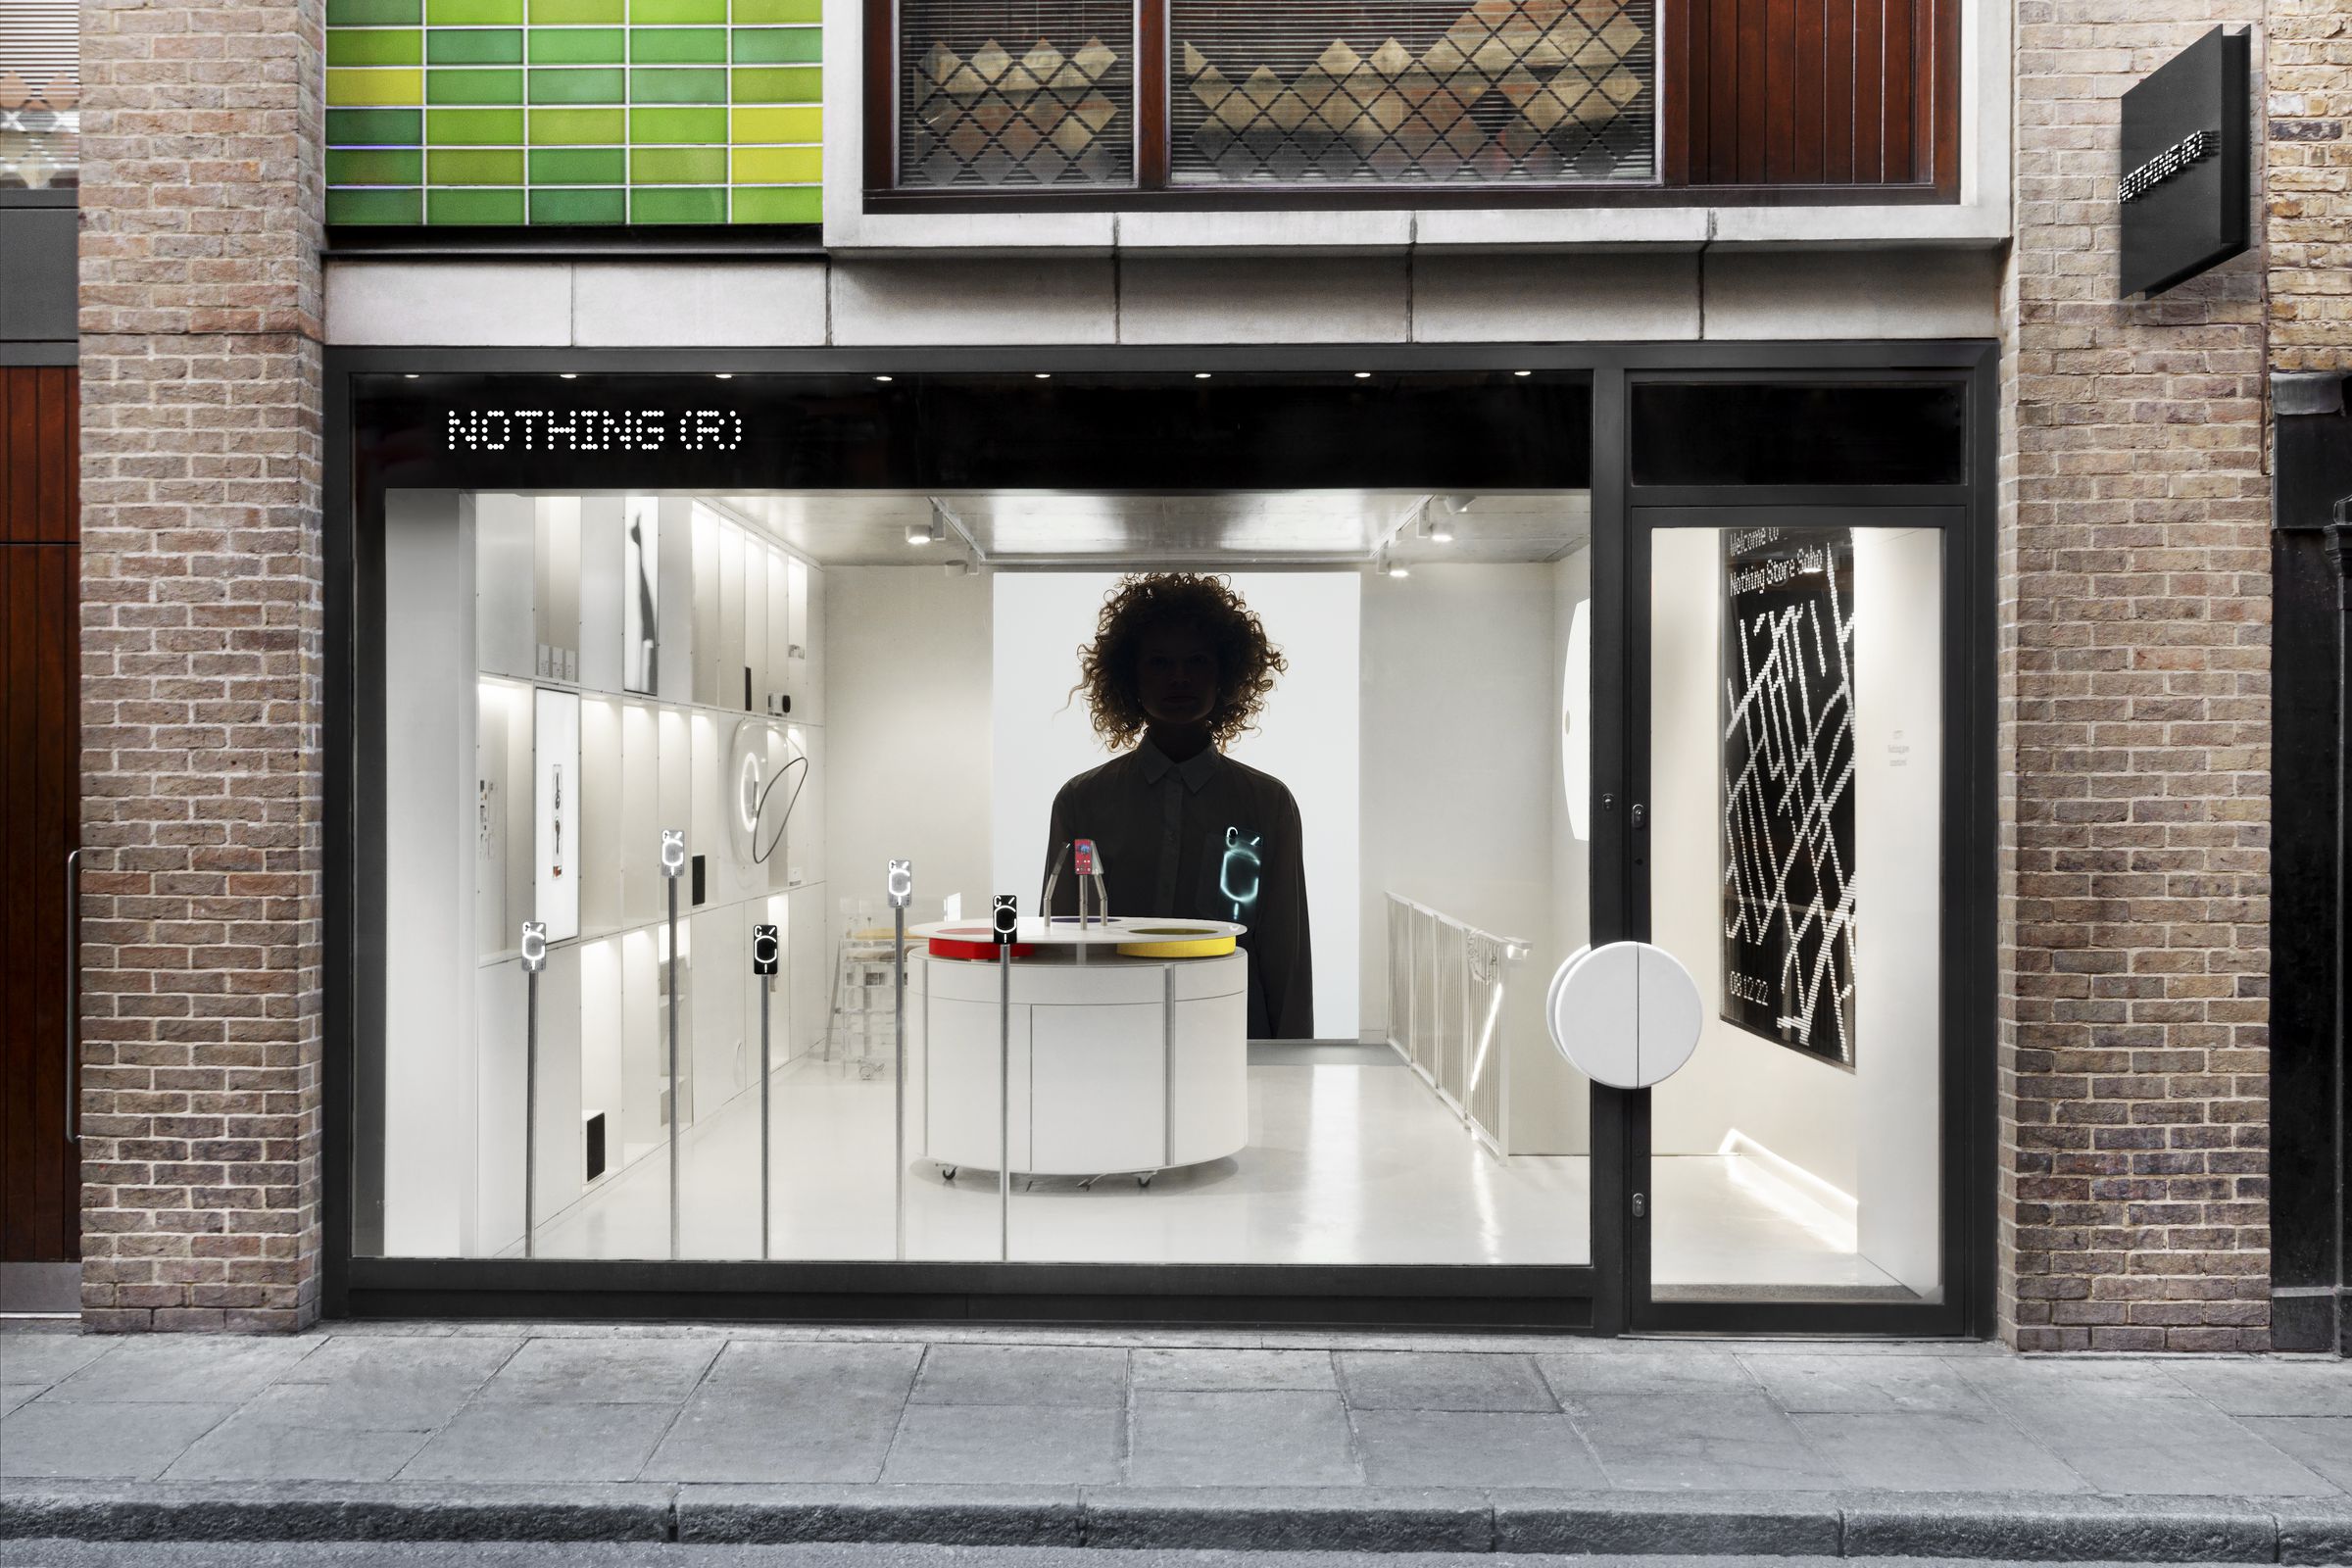 A photograph taken of the outside of the Nothing Store in Soho, London (UK).